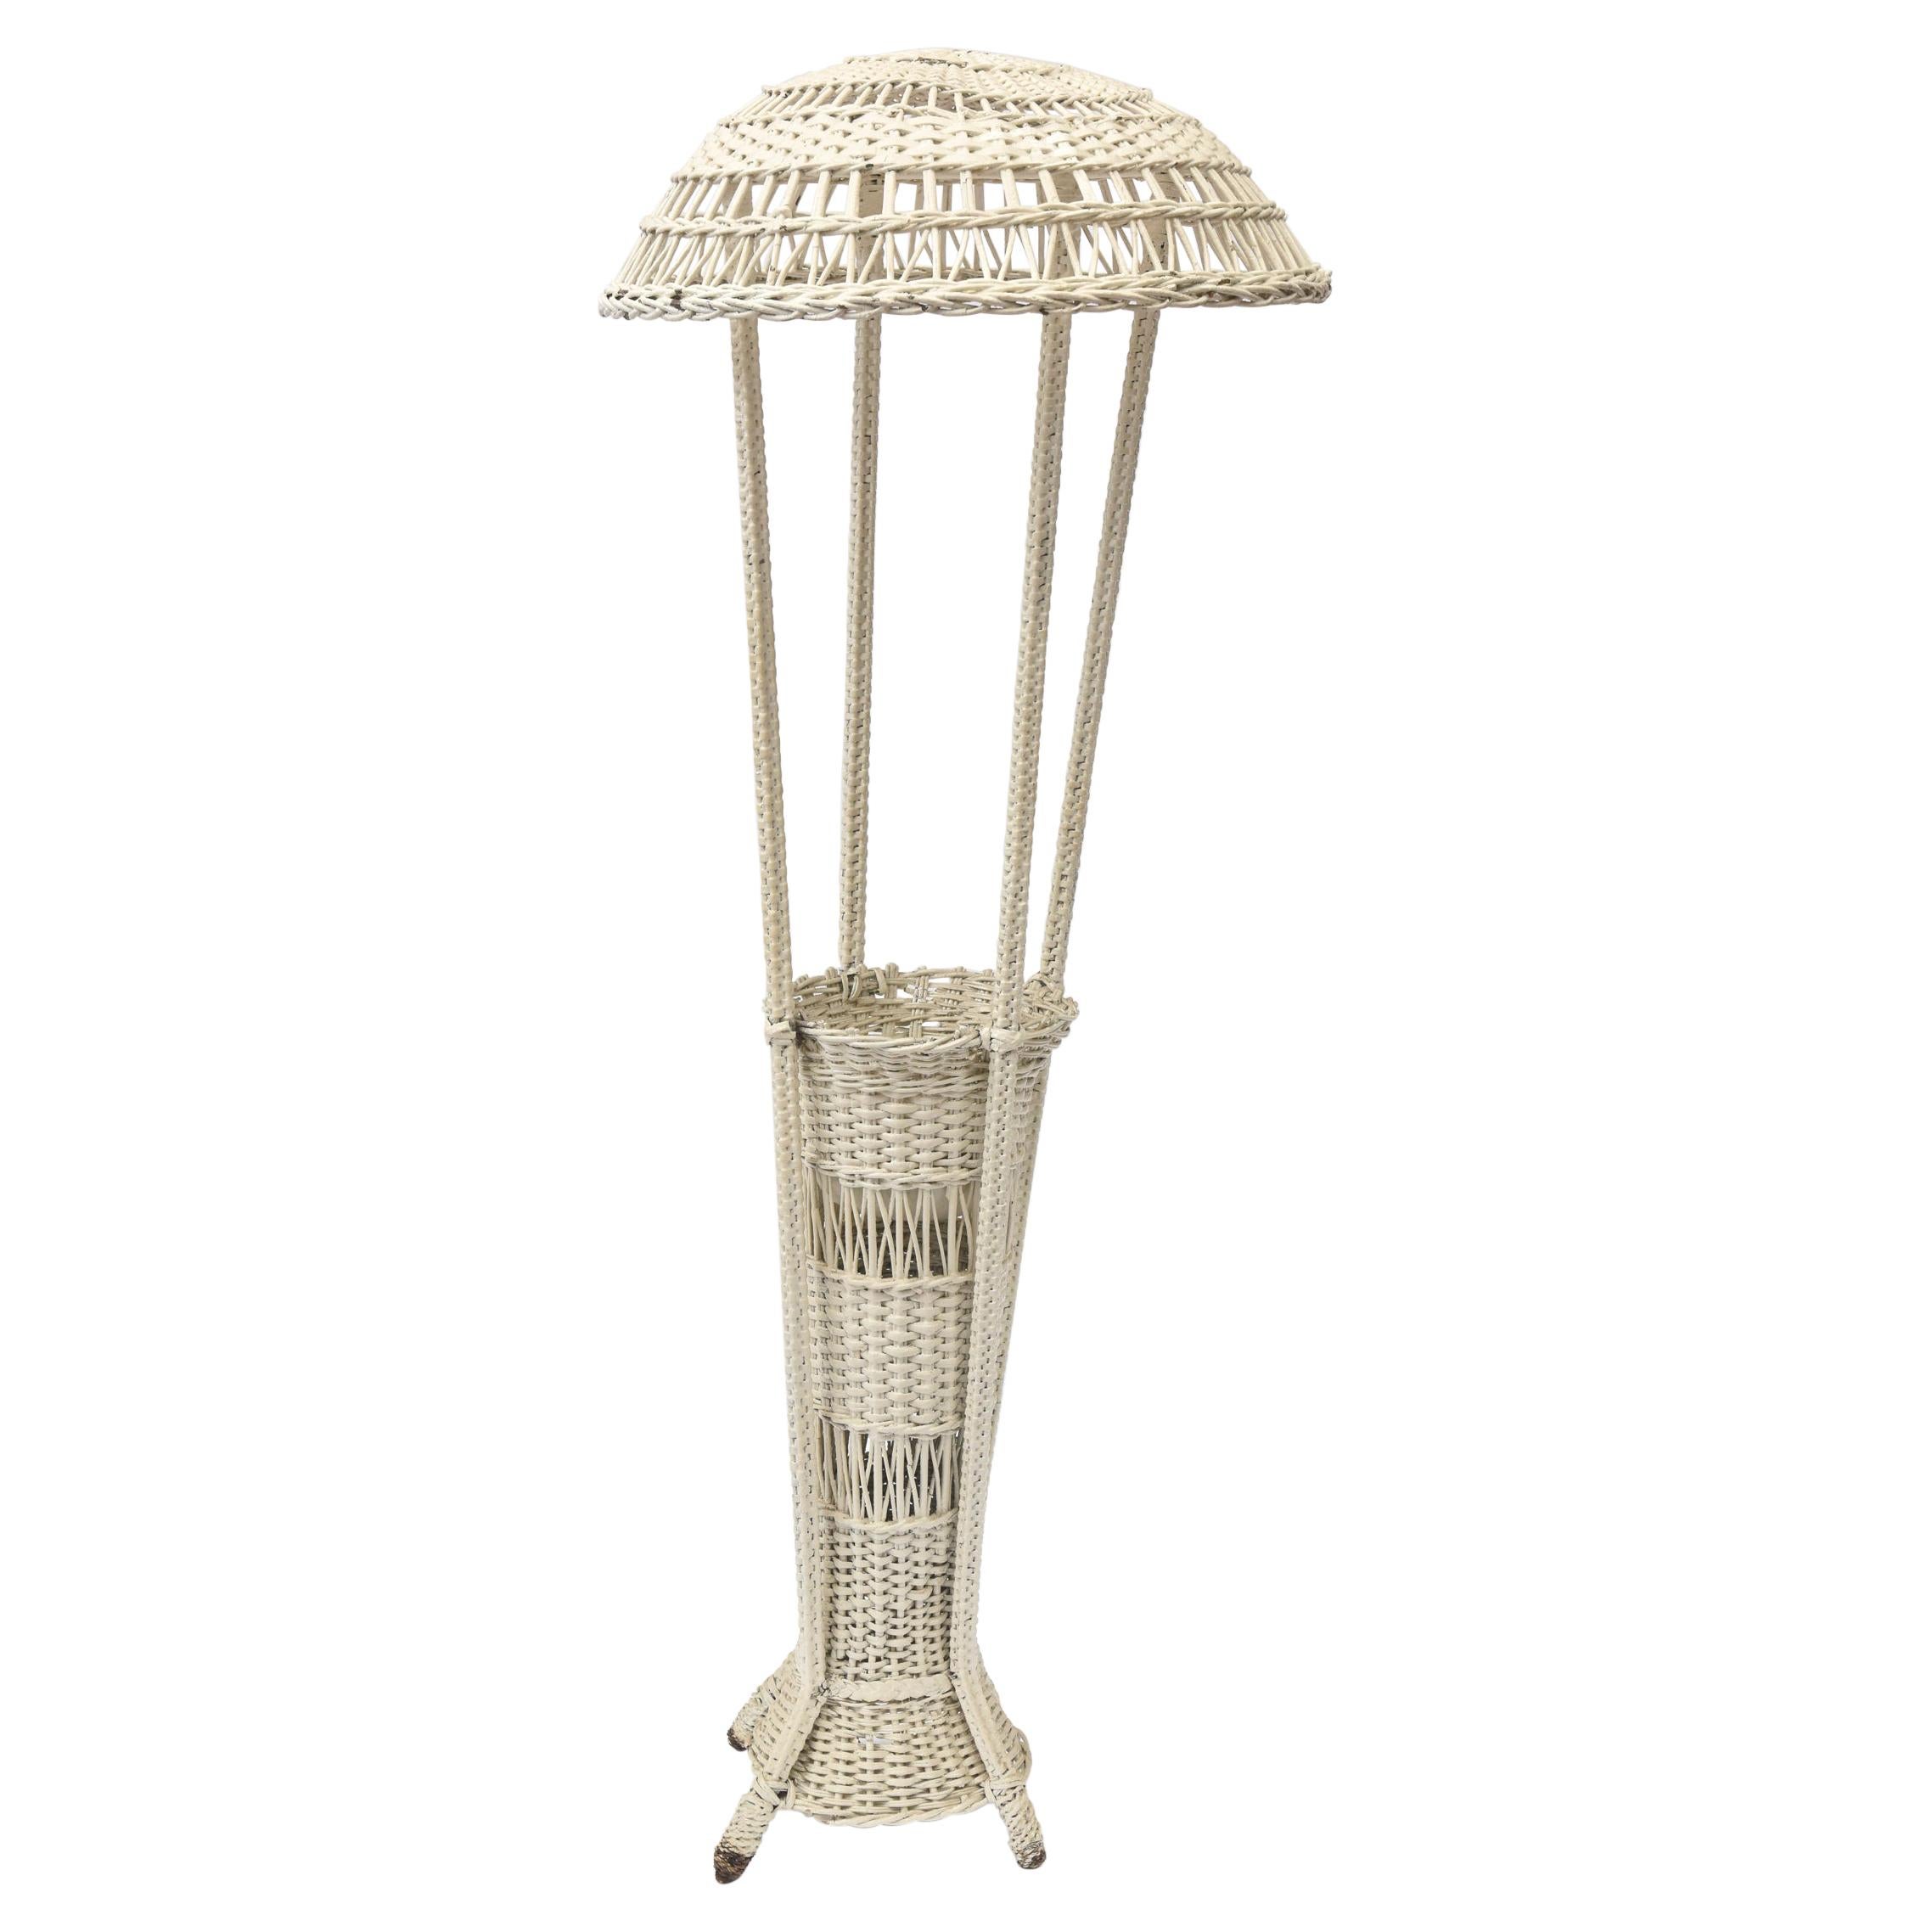 Wicker Standing Floor Lamp Early 20th Century with Flower Vase Insert Base